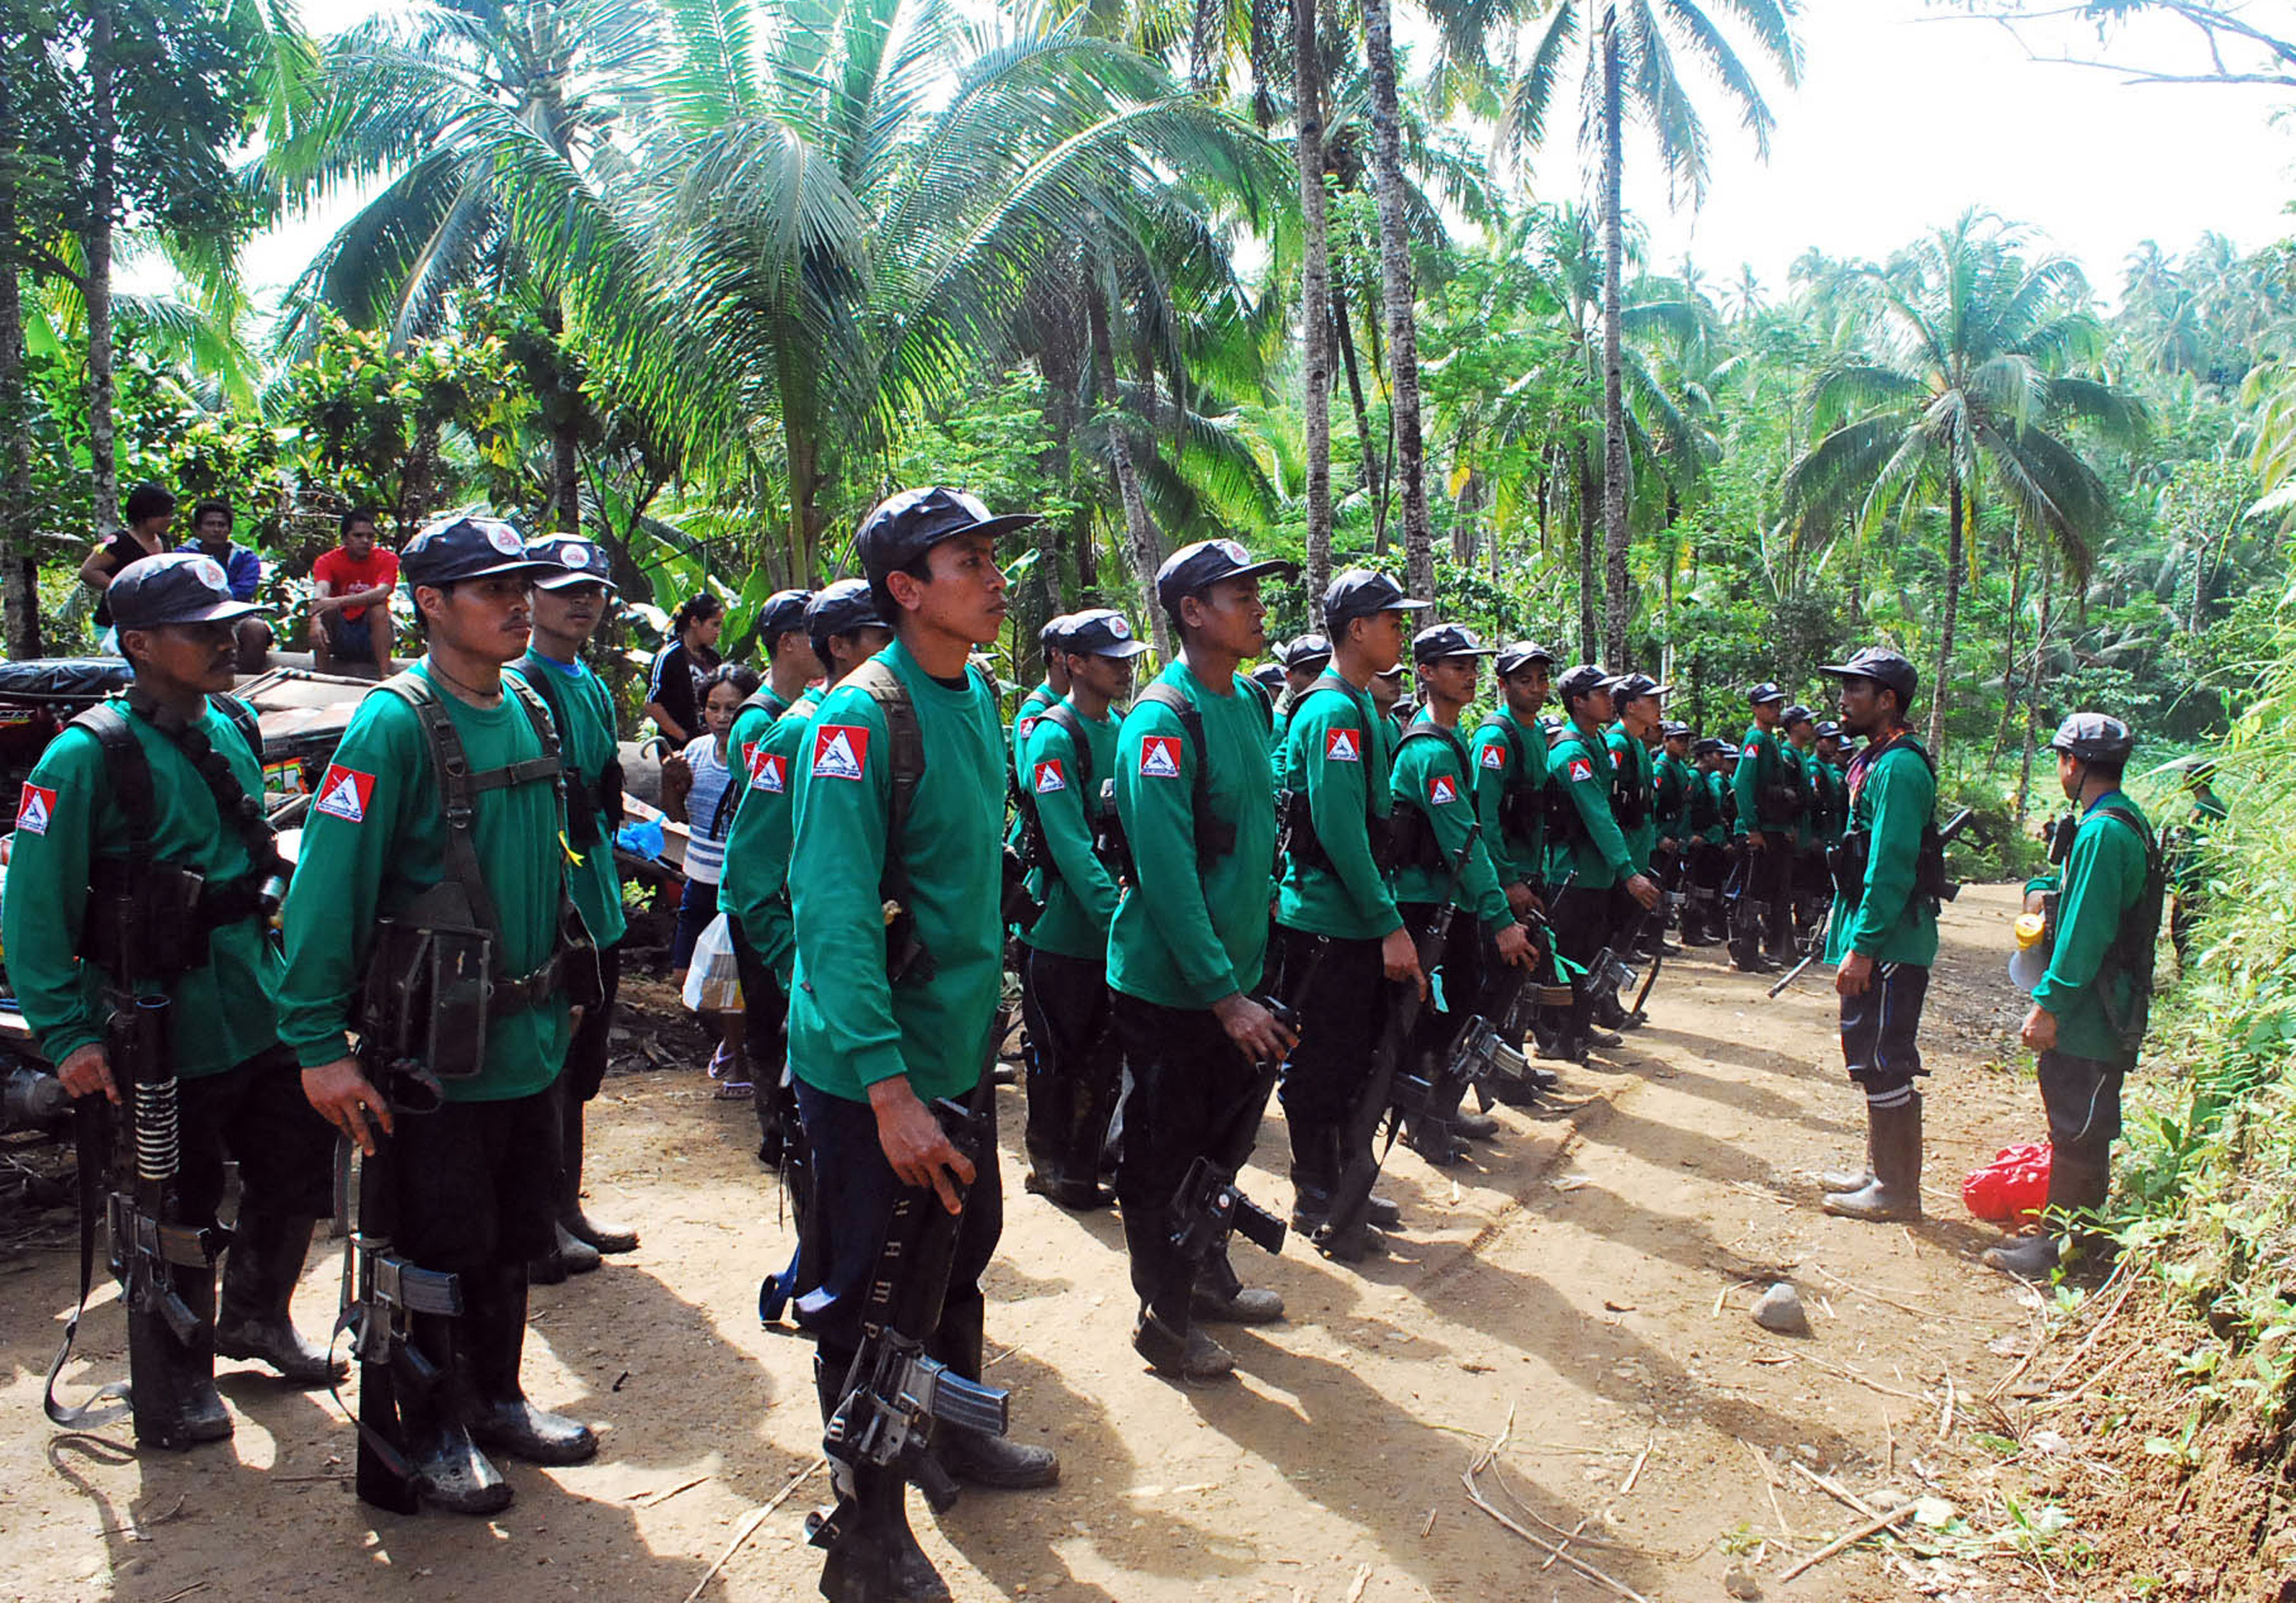 In this file photograph taken on December 26, 2009, New People's Army (NPA) rebels stand to attention during the 41st founding anniversary of the Communist Party of the Philippines at an unspecified location in the hinterlands of Surigao del Sur province, in the southern Philippine island of Mindanao. / AFP PHOTO / MITCHELL MADURO / XGTY